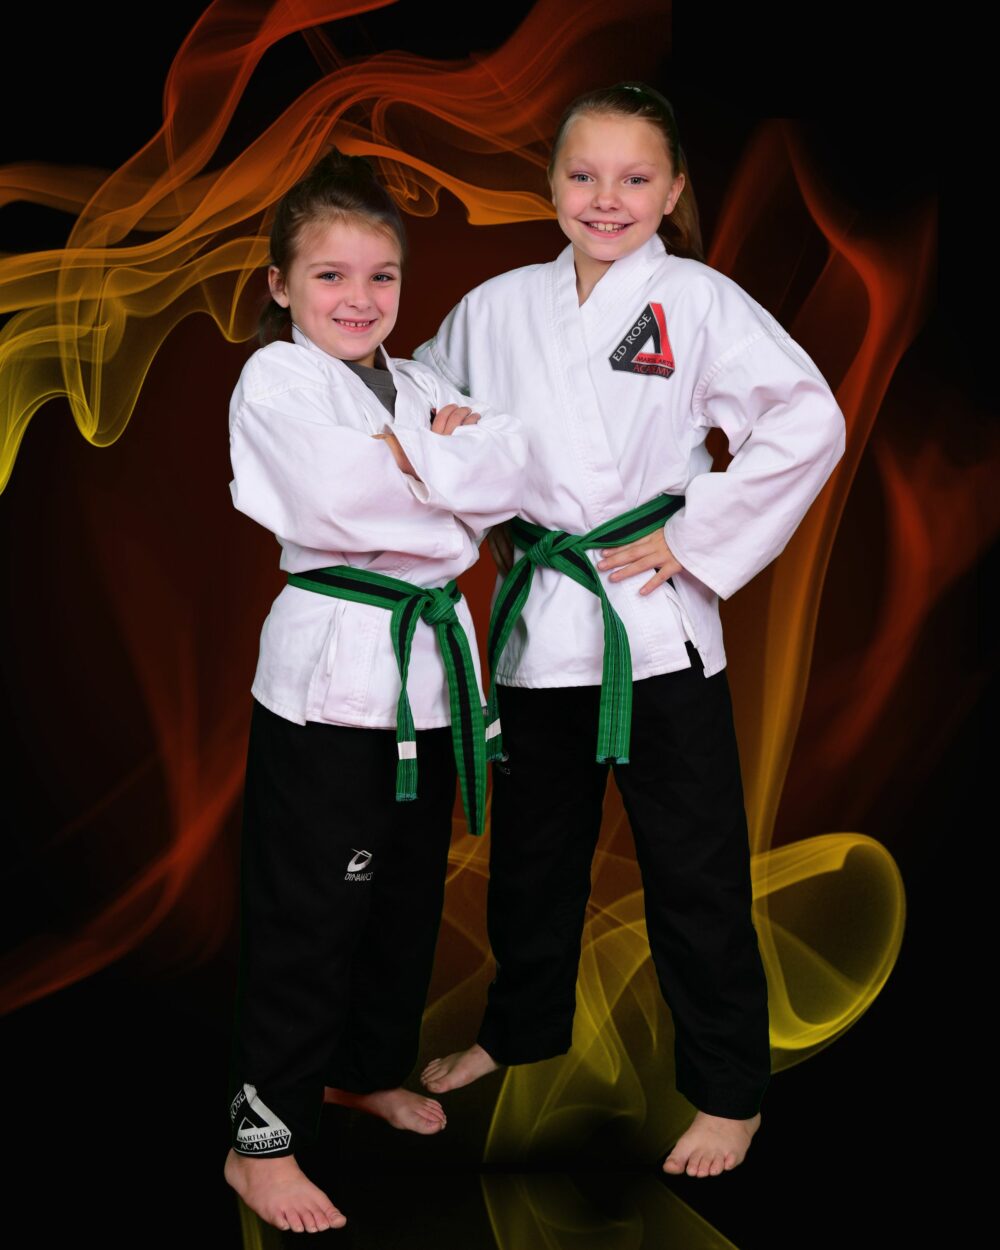 Ed Rose's Martial Arts Academy First Class FREE!